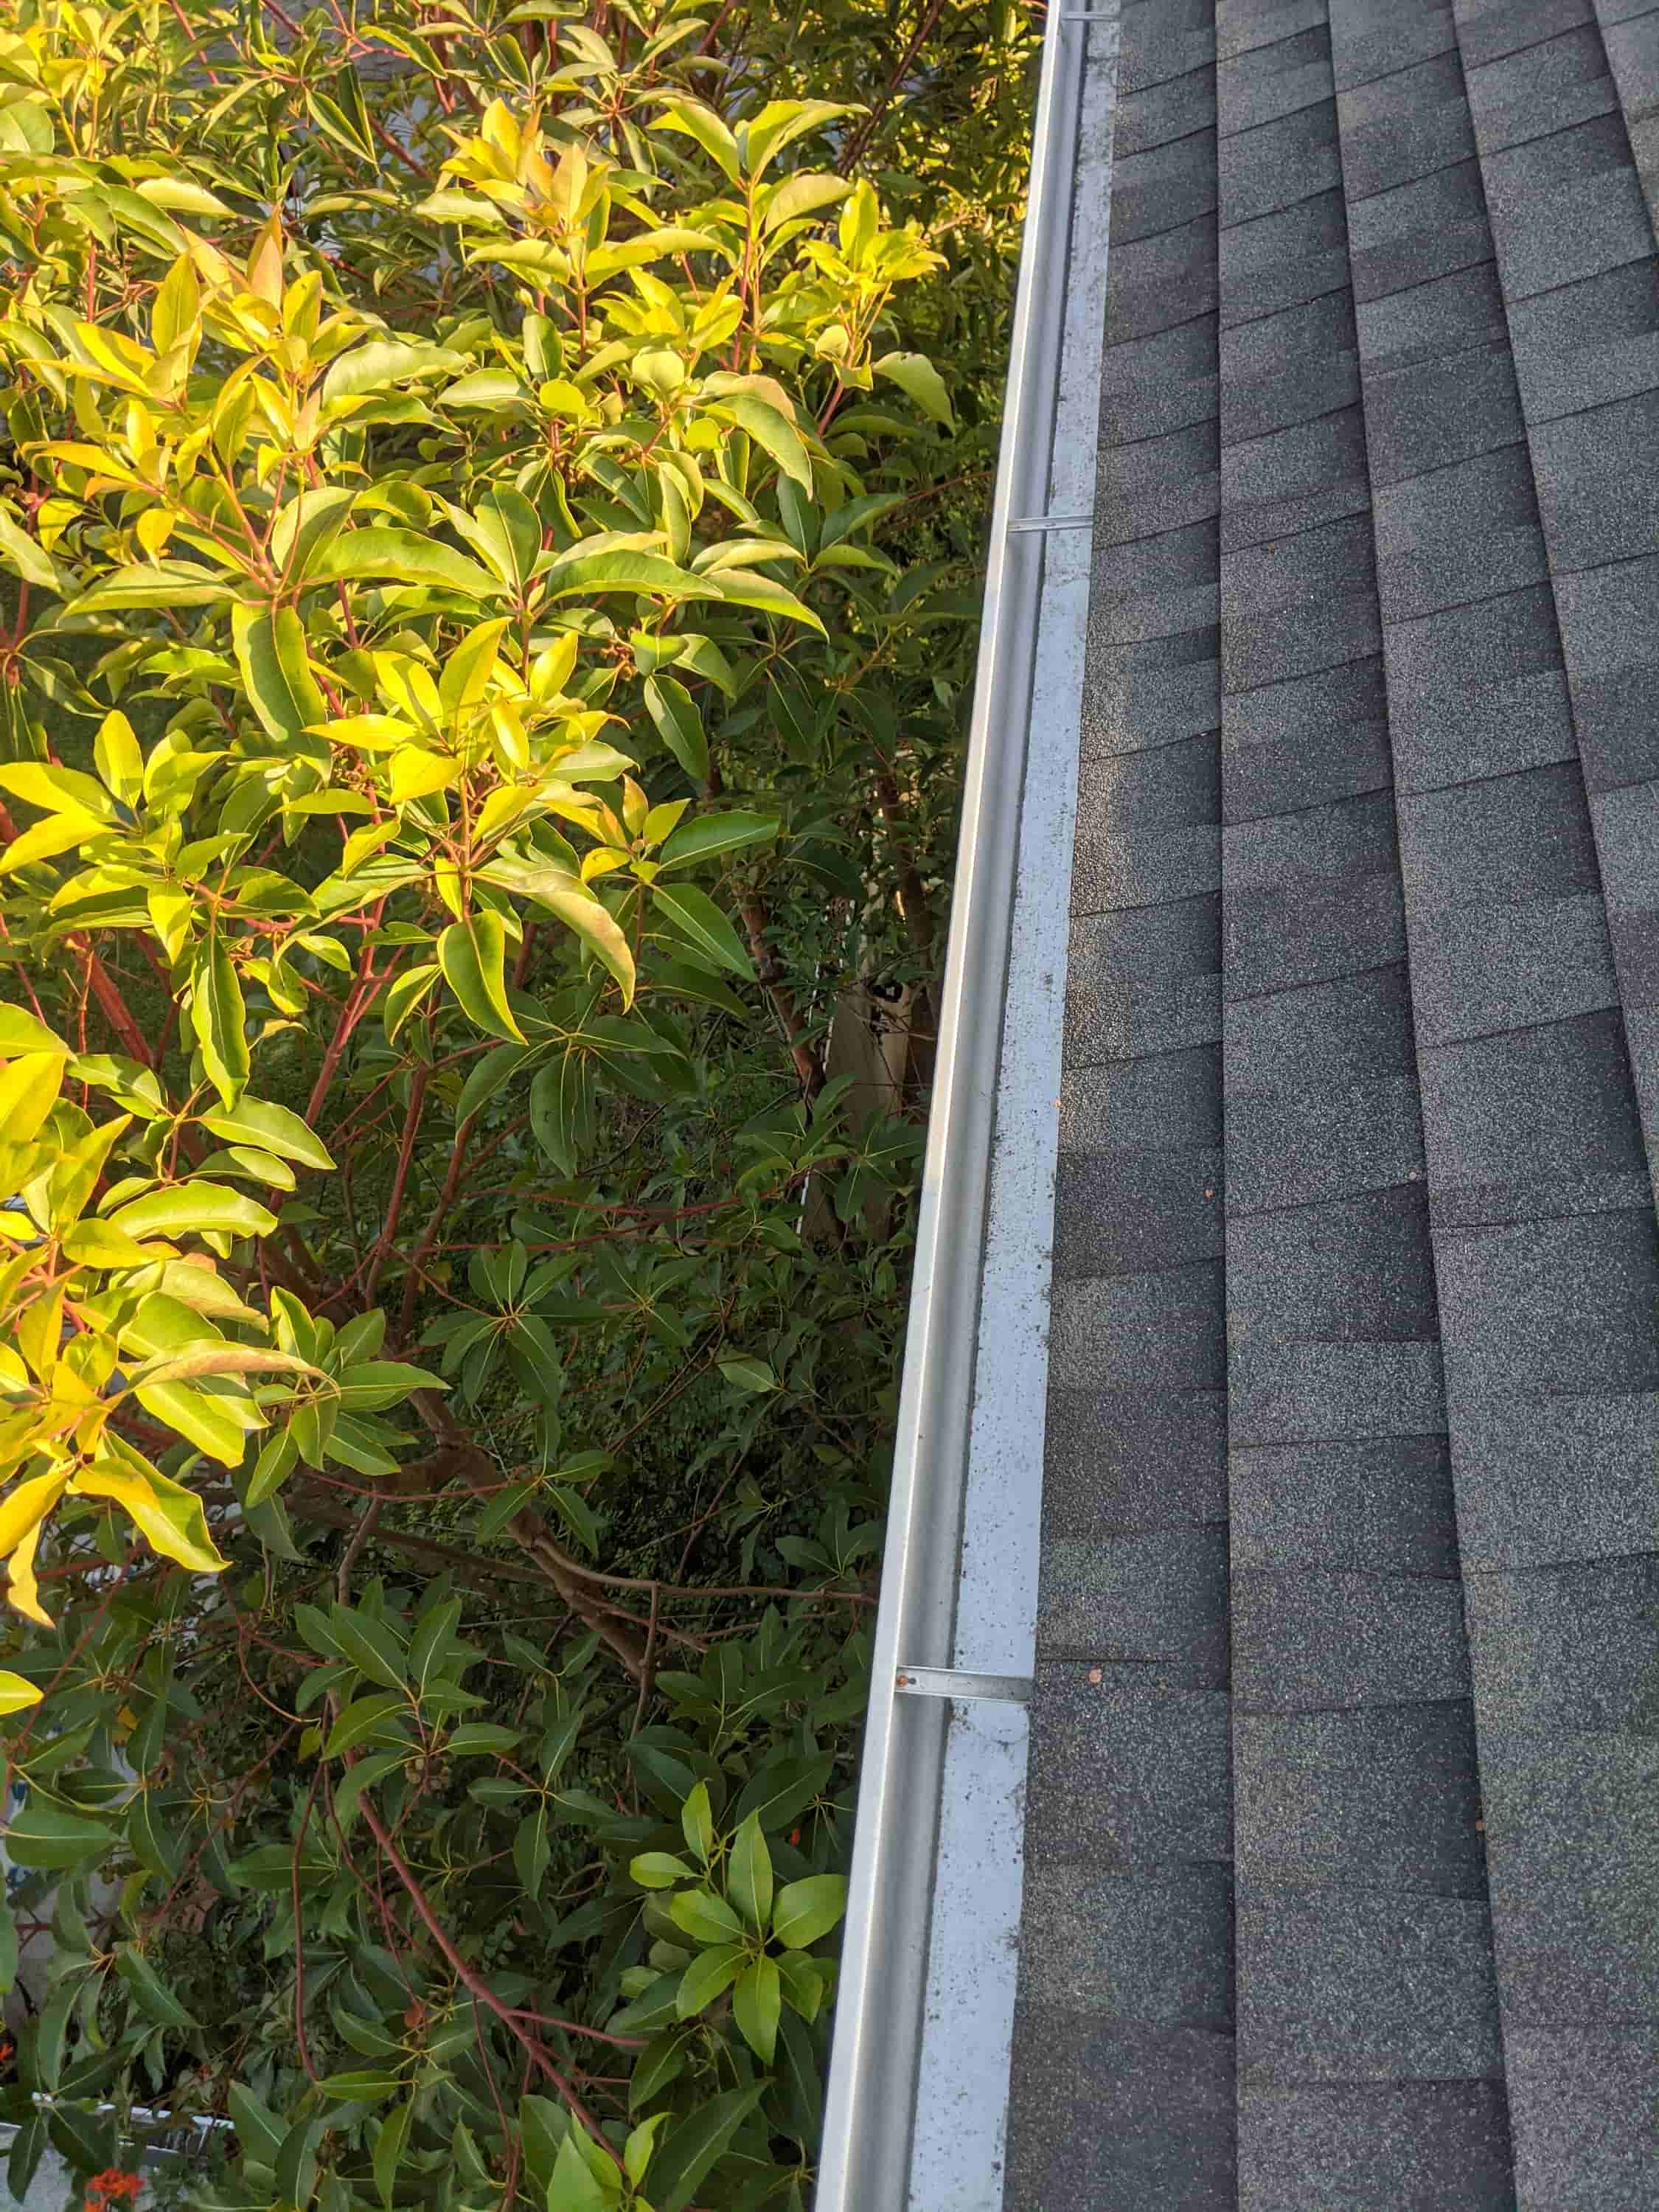 how to clean gutters and downspouts